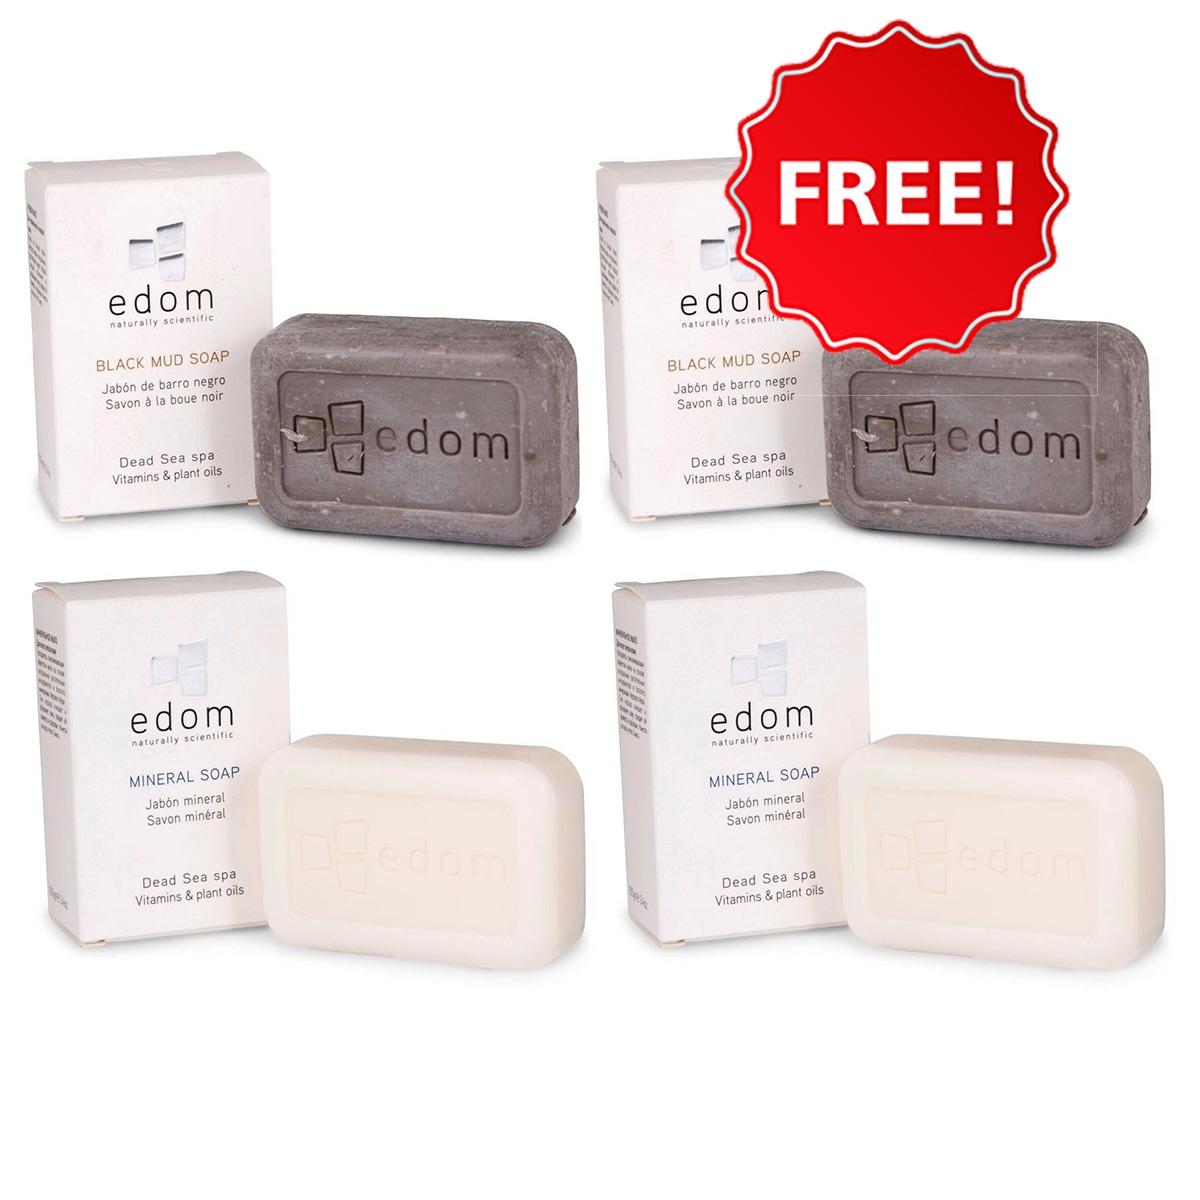 Edom Dead Sea Soap Value Pack: 2 Black Mud Soaps and 2 Mineral Soaps - 1